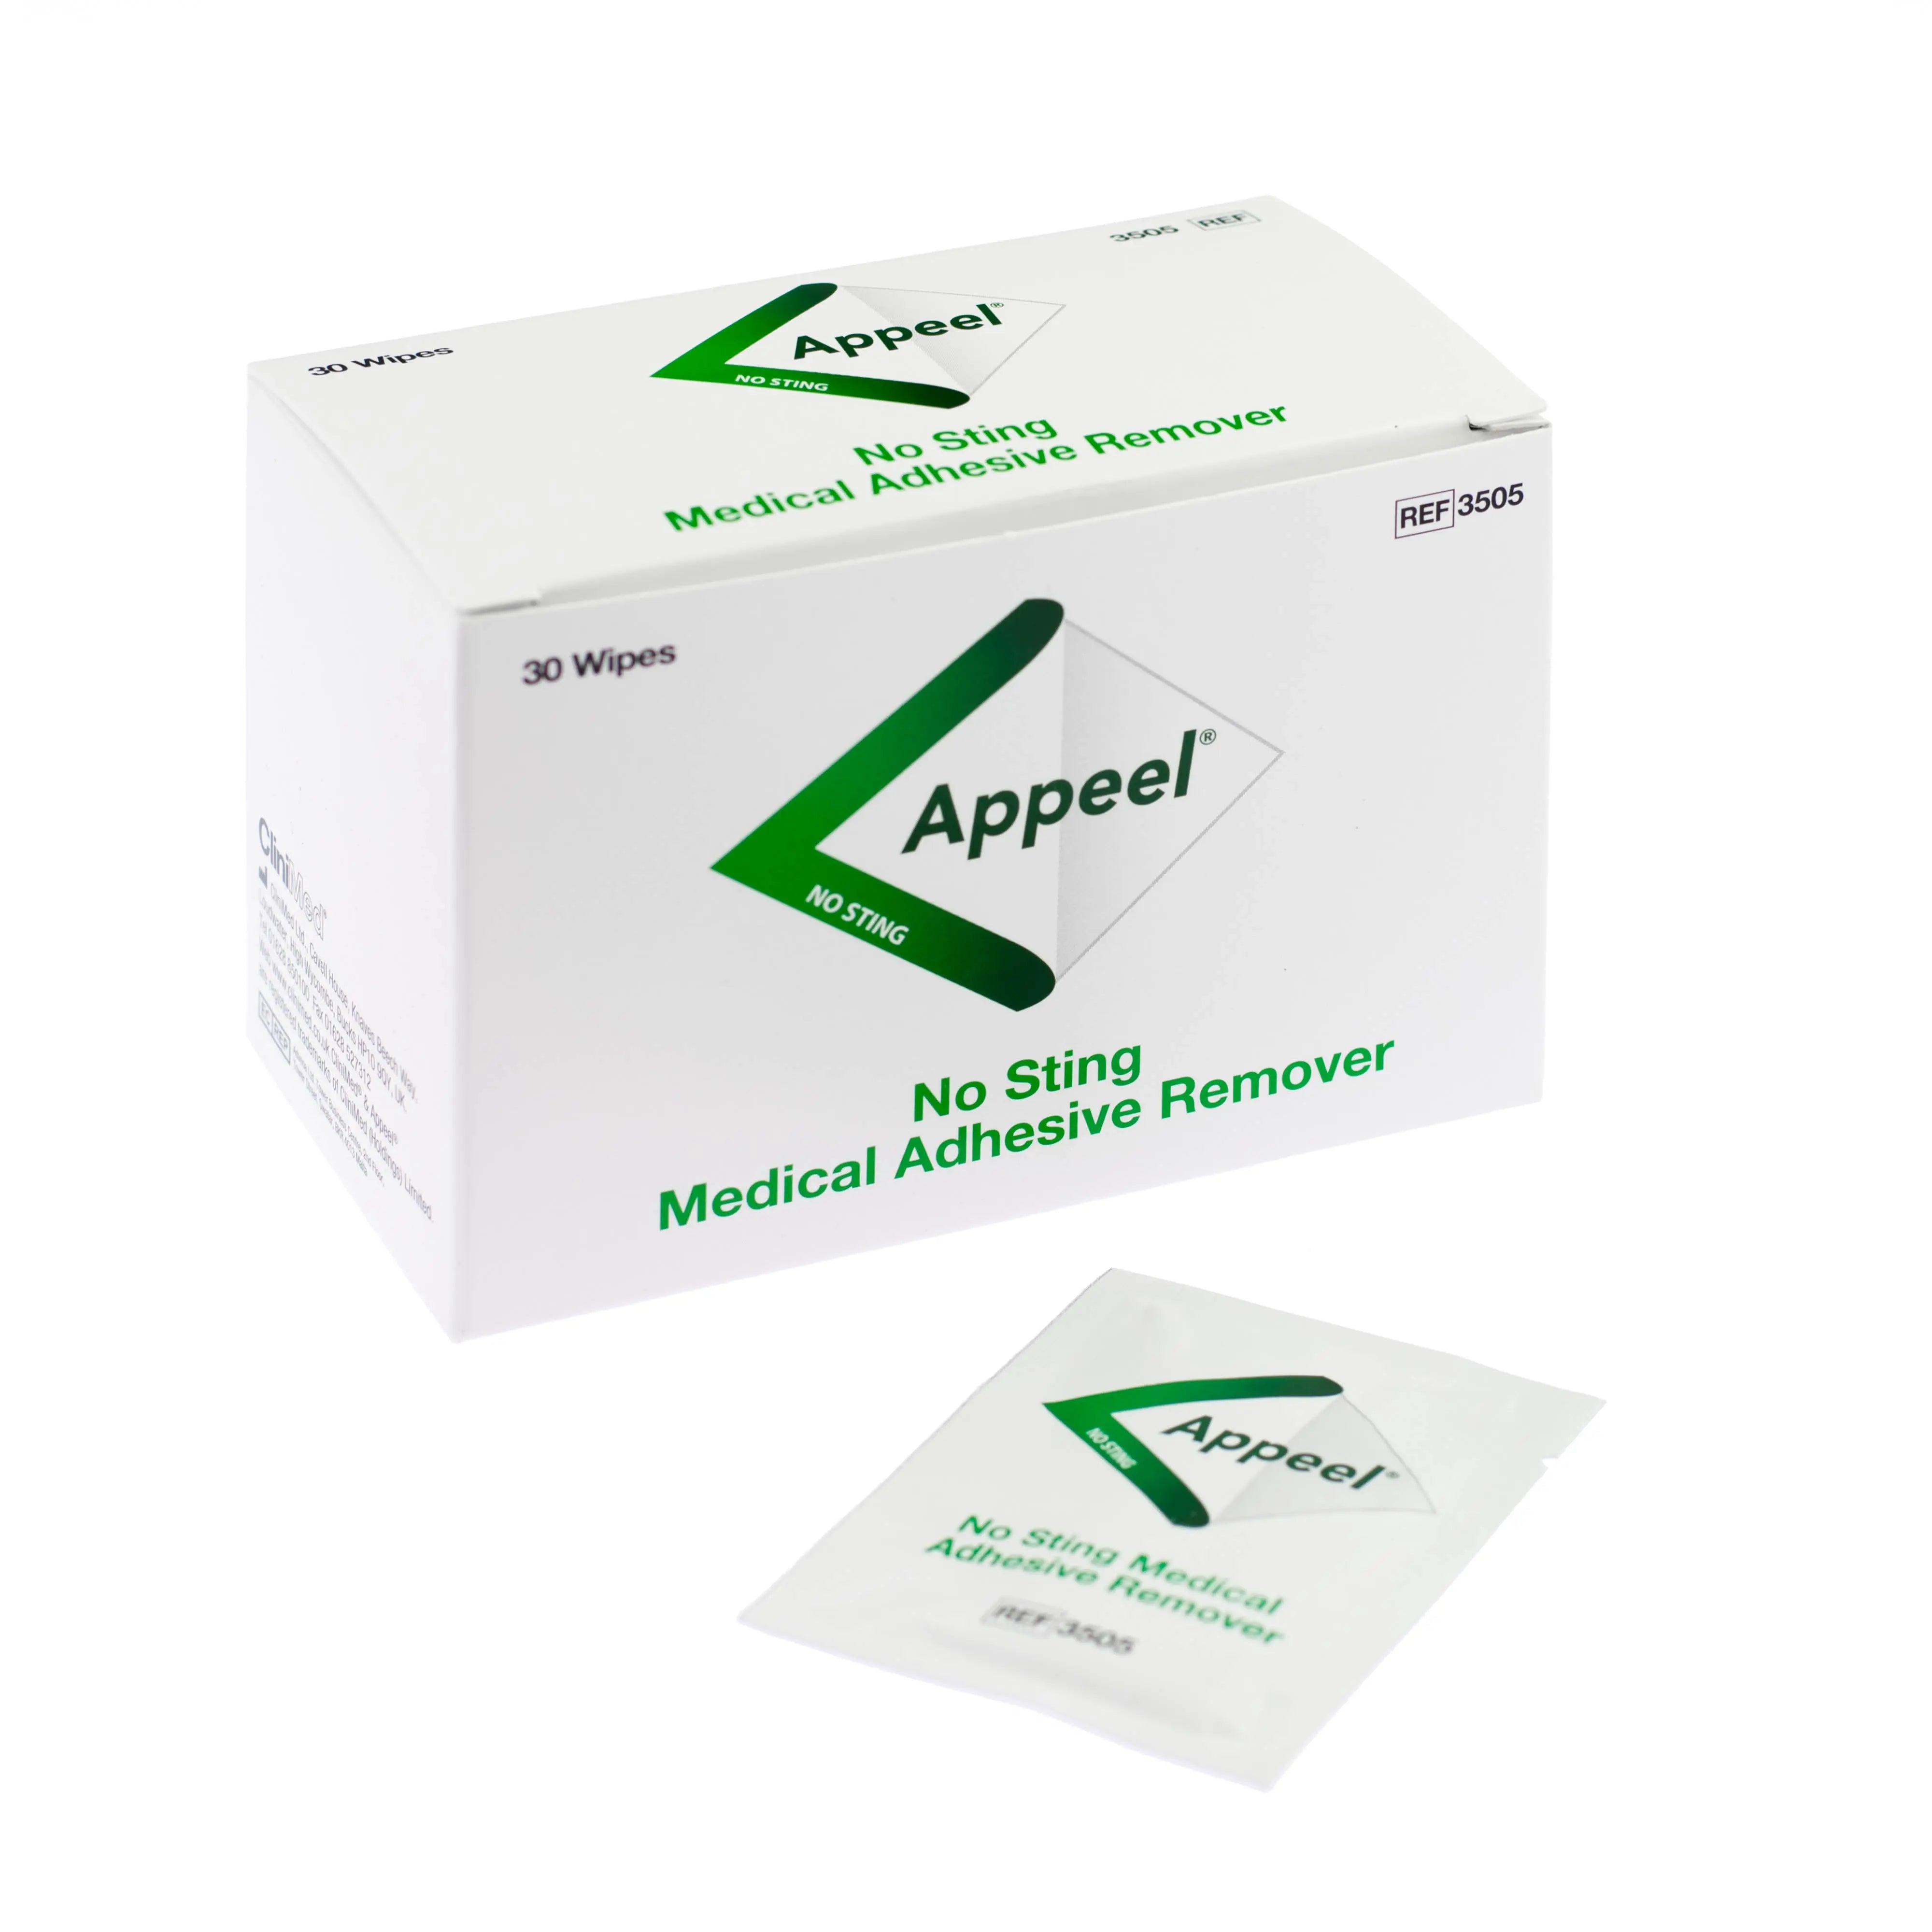 Appeel No Sting Medical Adhesive Remover Wipes (x30)